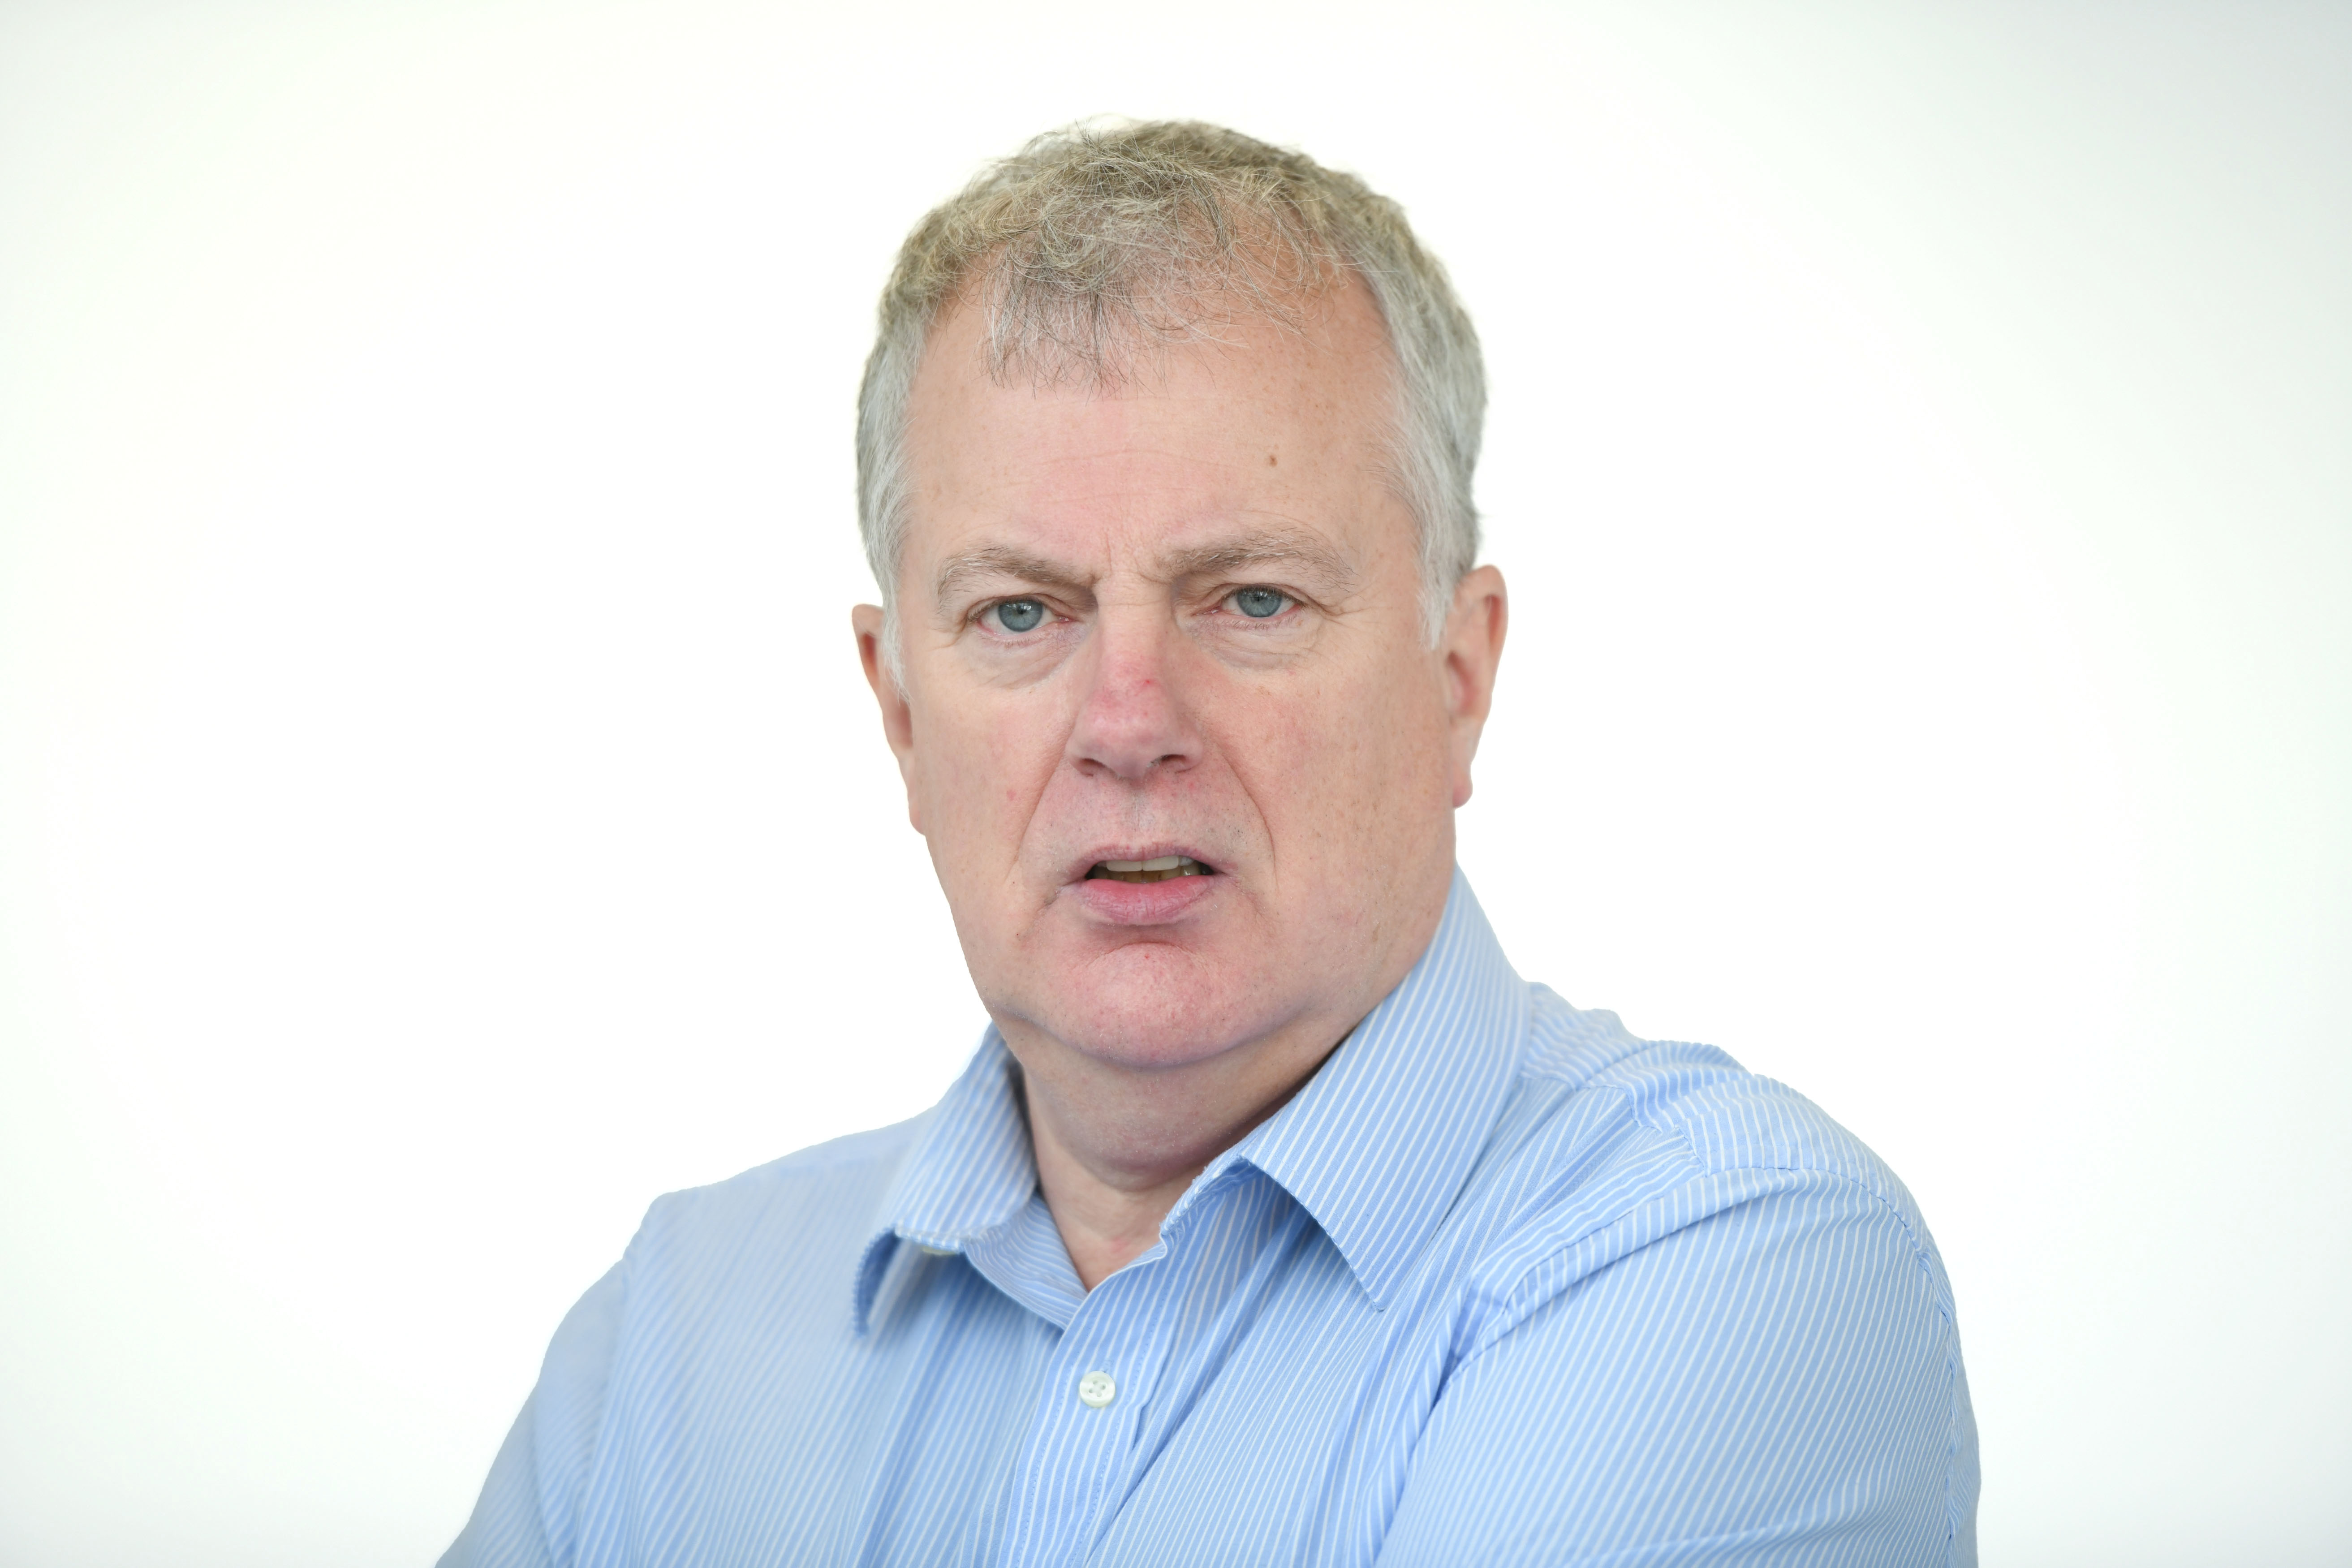 A profile picture of Jim Baird, a Professor in Civil Engineering and Environmental Management at GCU.